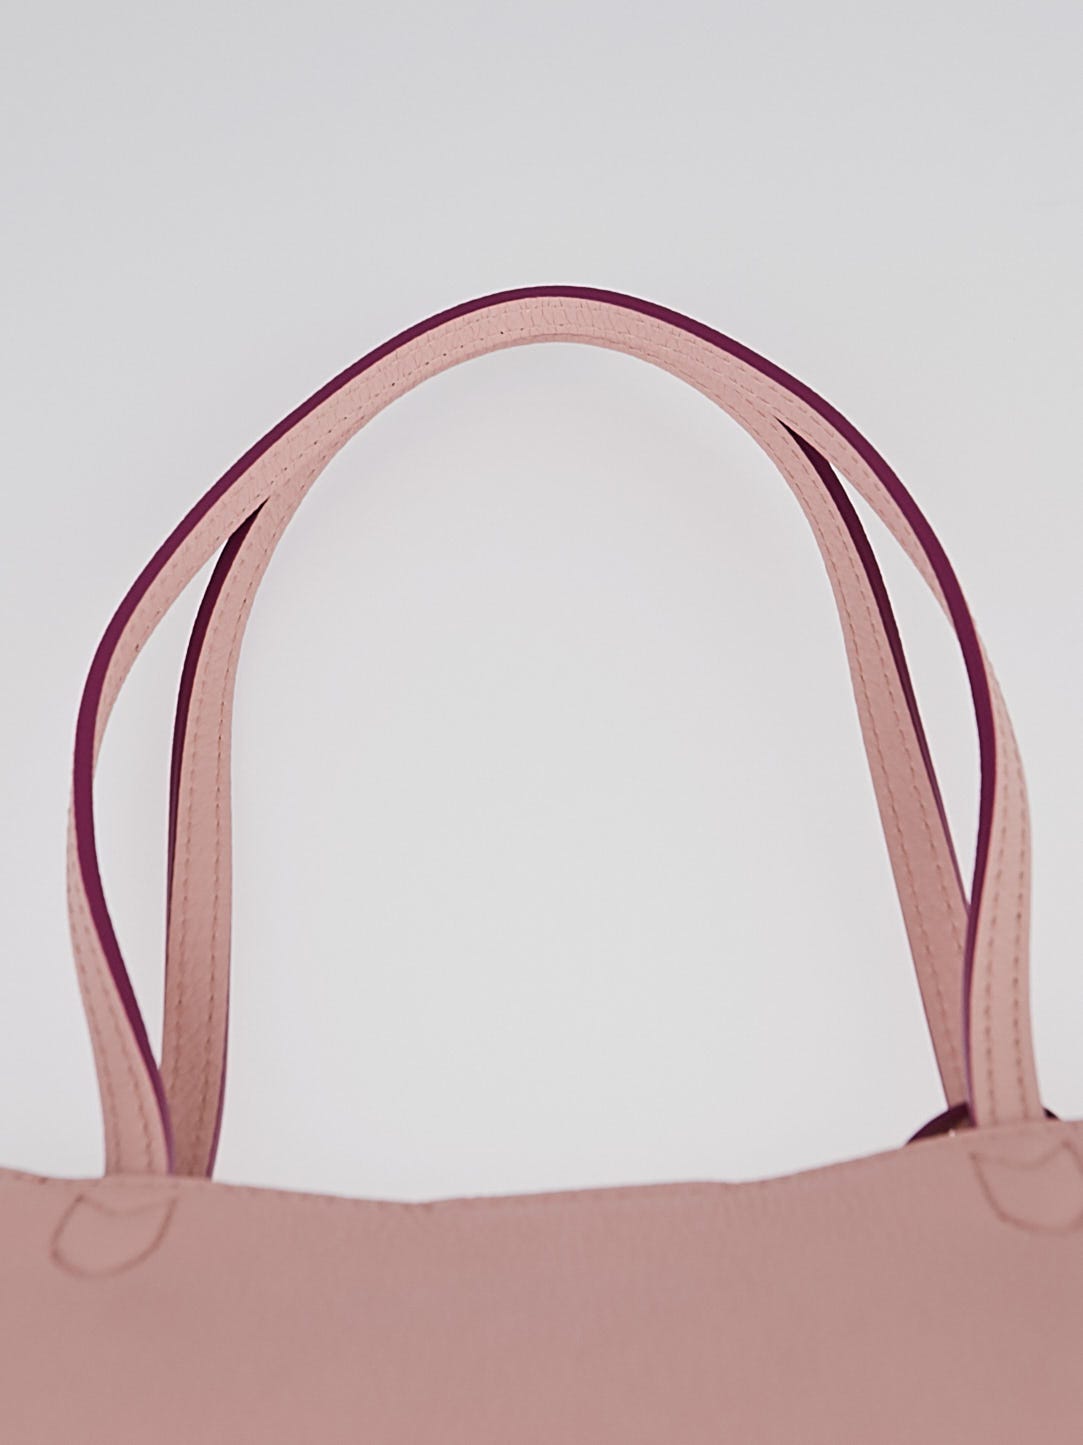 This Louis Vuitton Pink Lockme Cabas Tote is too pretty💗😍 Get it